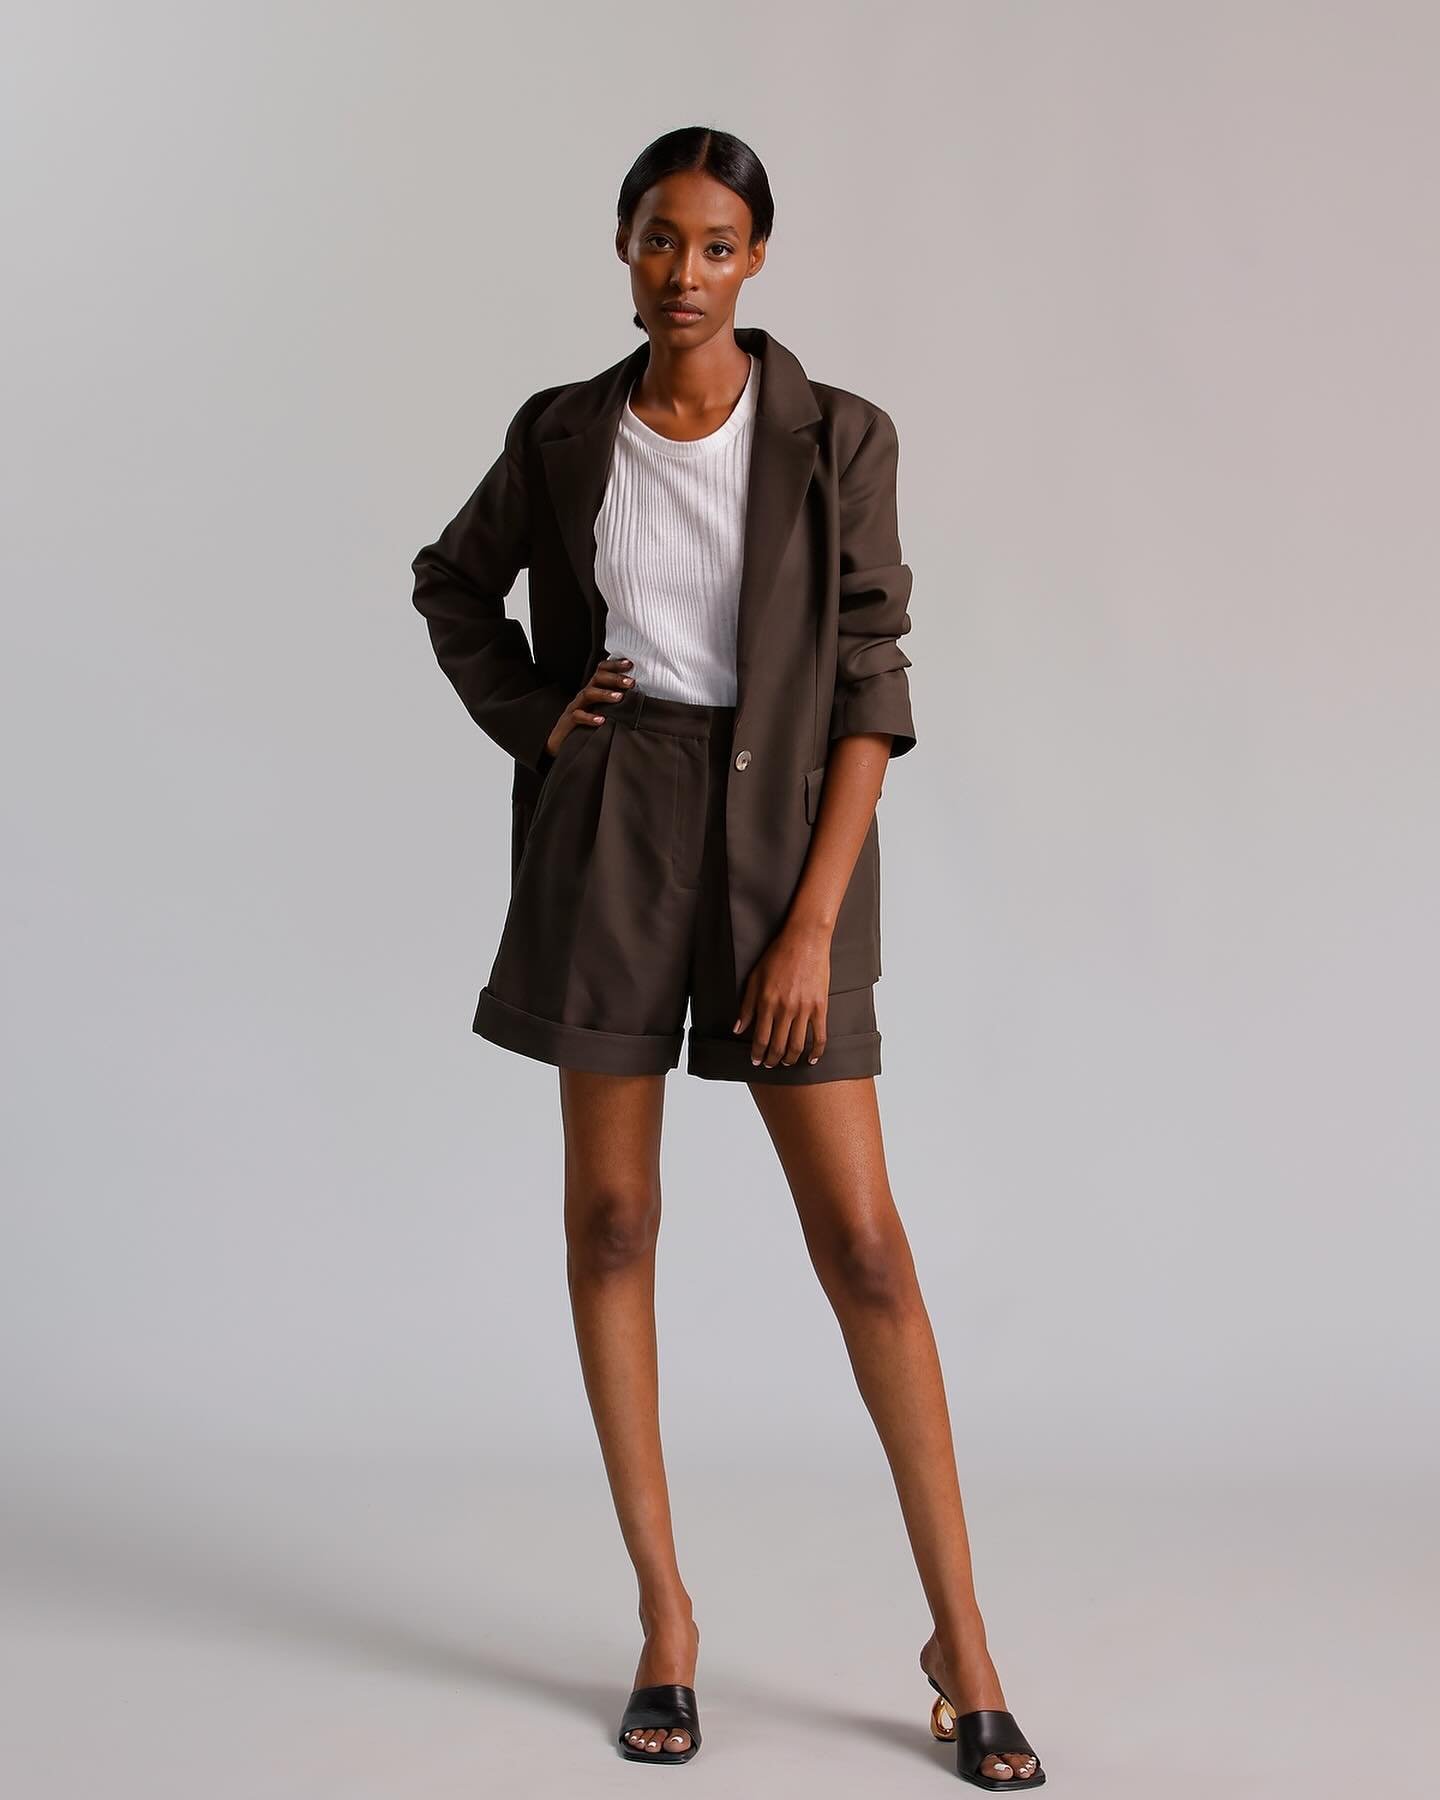 A new must have for the spring - a short suit set, especially in this espresso brown, oversized Isa suit jacket and Drew cuffed shorts.  #madeinchicago #sustainablefashion #springsuiting #timelessluxury #deadstockfabric #womenmade